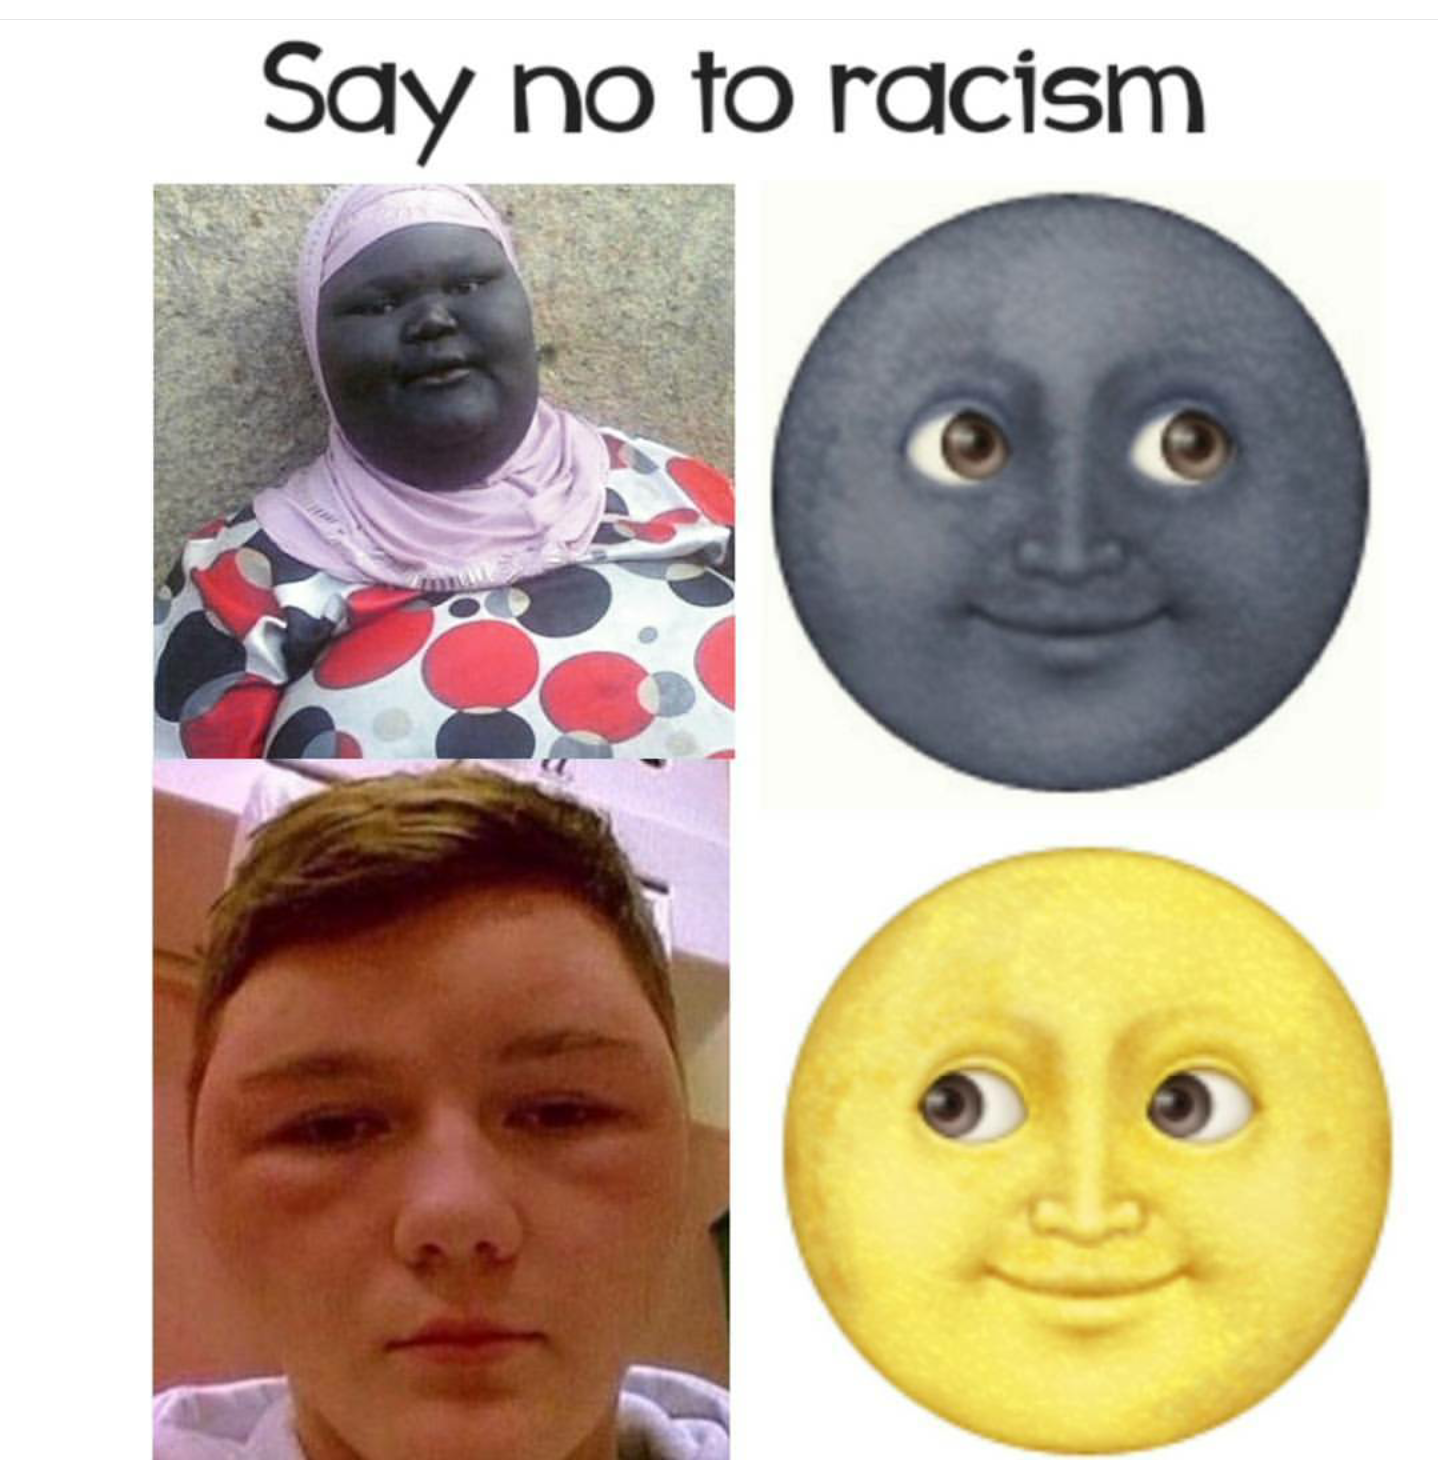 not sure if racism